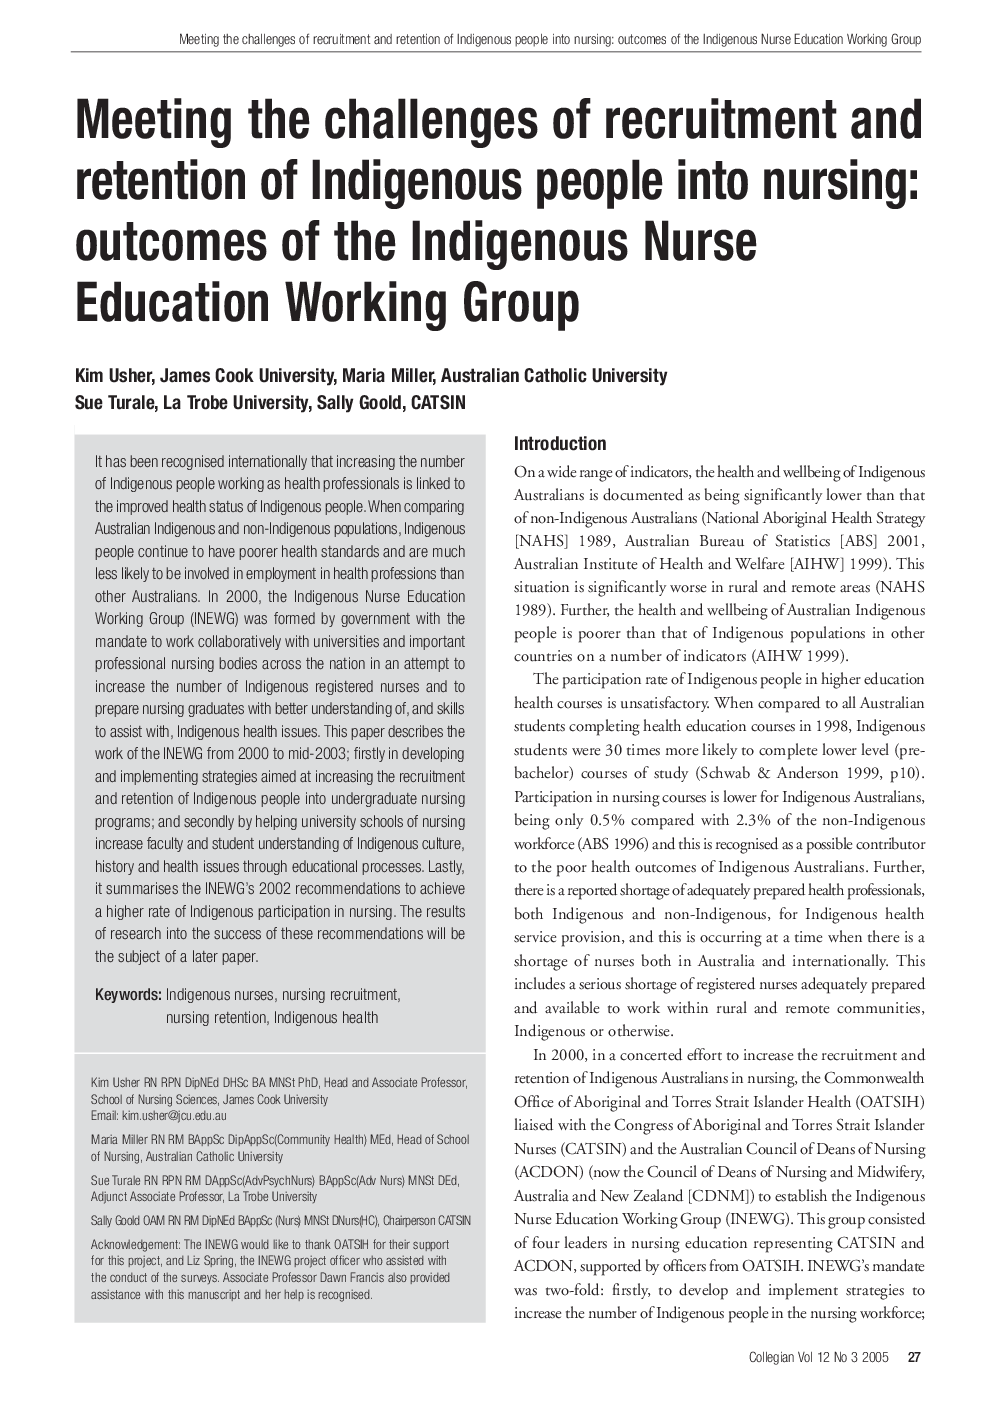 Meeting the challenges of recruitment and retention of Indigenous people into nursing: outcomes of the Indigenous Nurse Education Working Group